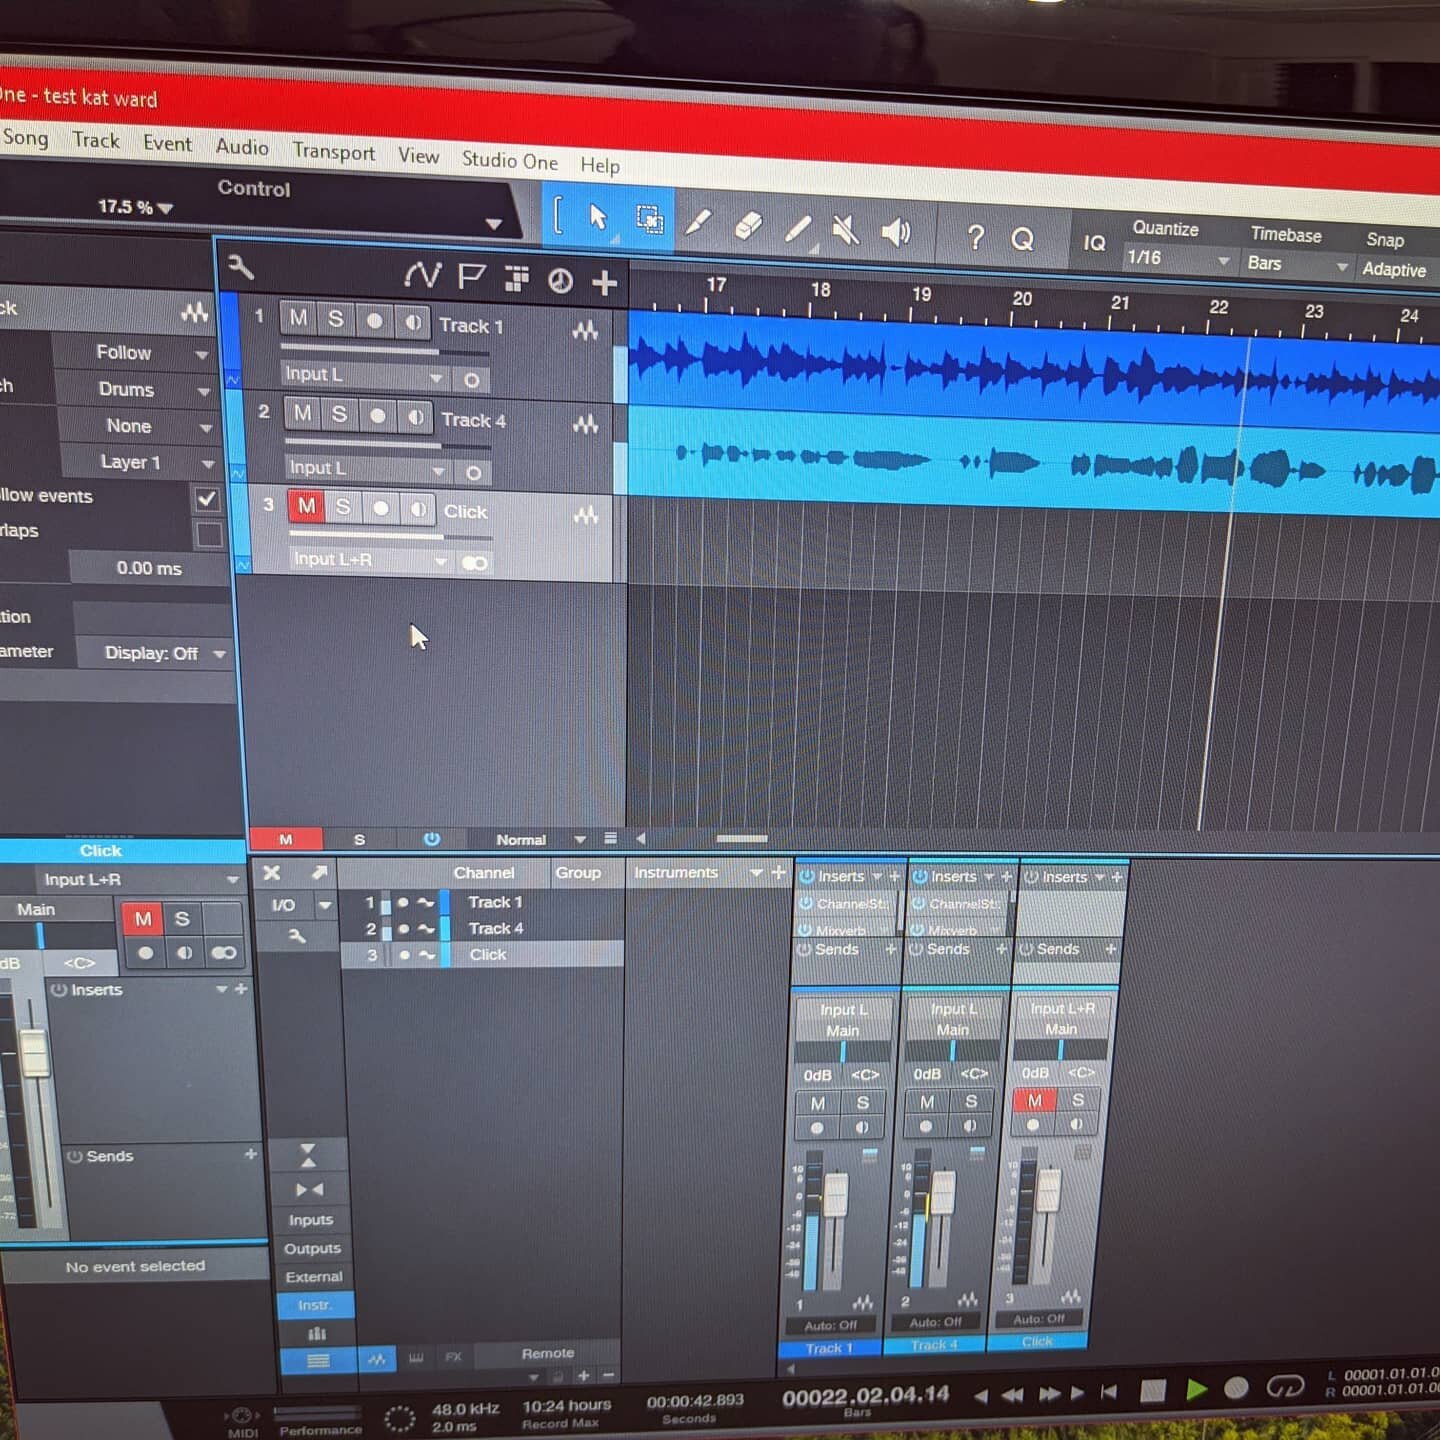 Getting to grips with Studio One 4 today trying out a new DAW. So far so good, very responsive, simple set up, uncluttered. 
#daw #studioone #studioone4 #musicrecording #femaleengineer #femalesongwriter #femalemusician #dreampop #indiefolk #experimen